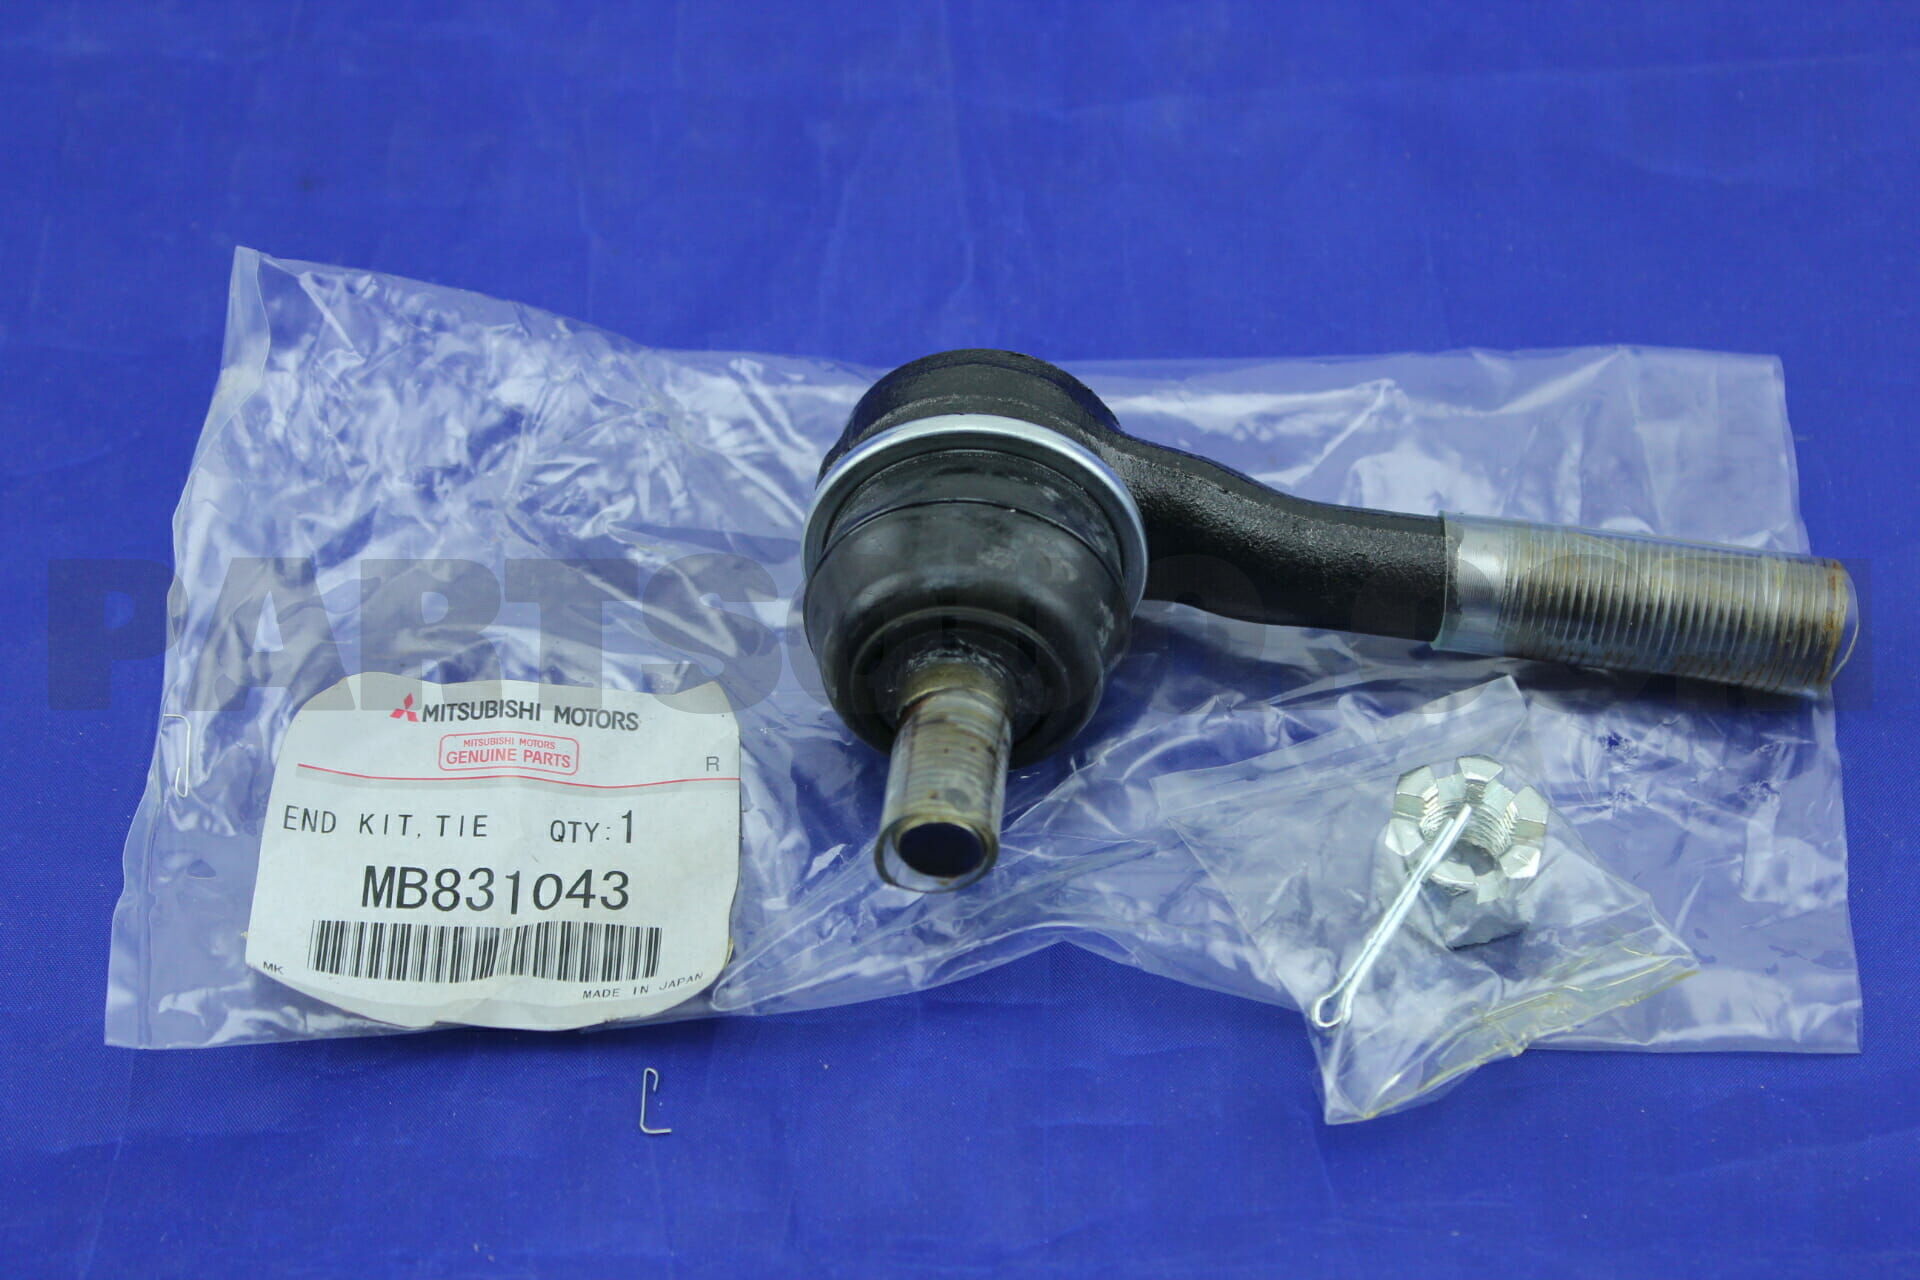 Mb1043 Mitsubishi End Kit Steering Tie Price 28 09 Weight 0 42kg Partsouq Auto Parts Around The World